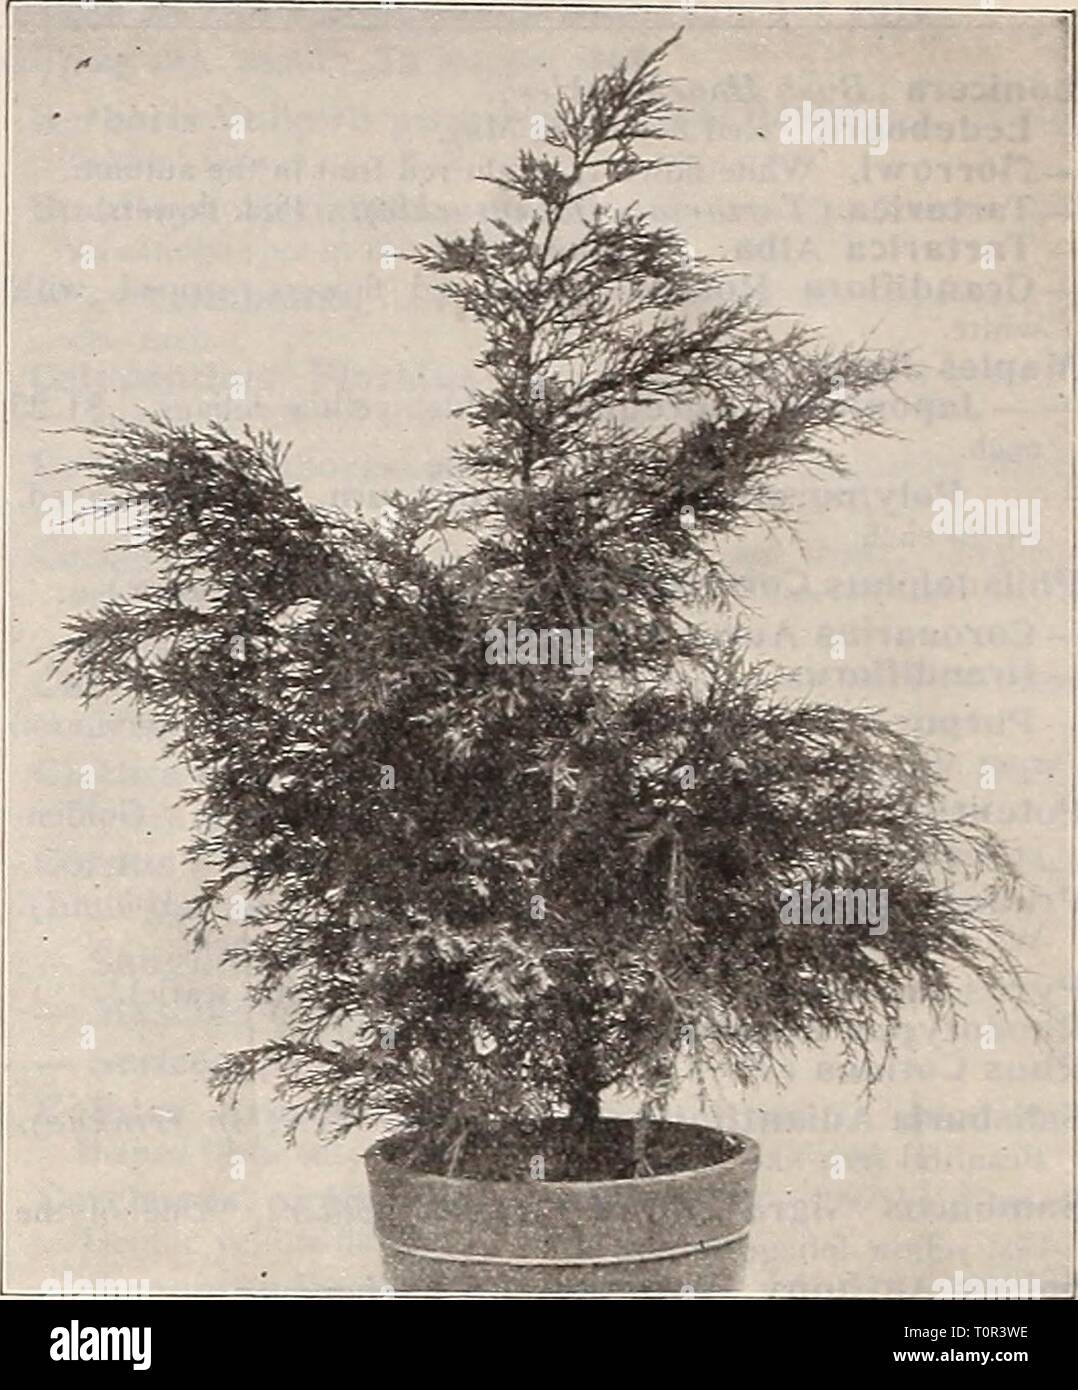 Dreer's 1910 autumn catalogue (1910) Dreer's 1910 autumn catalogue  dreers1910autumn1910henr Year: 1910  Thcyopsis Standishi. Juniperus Pfitzerianus. Picea Pungens Glauca Pendula. Same as the preceding, with pendulous branches. Plants, 2A feet high, $3.50 each. Picea Alcockiana (Alcock's Spruce). An attractive tree. Foliage, dark green above and silvery beneath, giving the whole a variegated appearance. Plants, 3 feet high, $2.00 each. Picea Omorika. Foliage silvery underneath, giving it a unique and attractive appearance. Strong grower. Plants. U feet high, $1.50 each. Picea Omorika Pendula.  Stock Photo